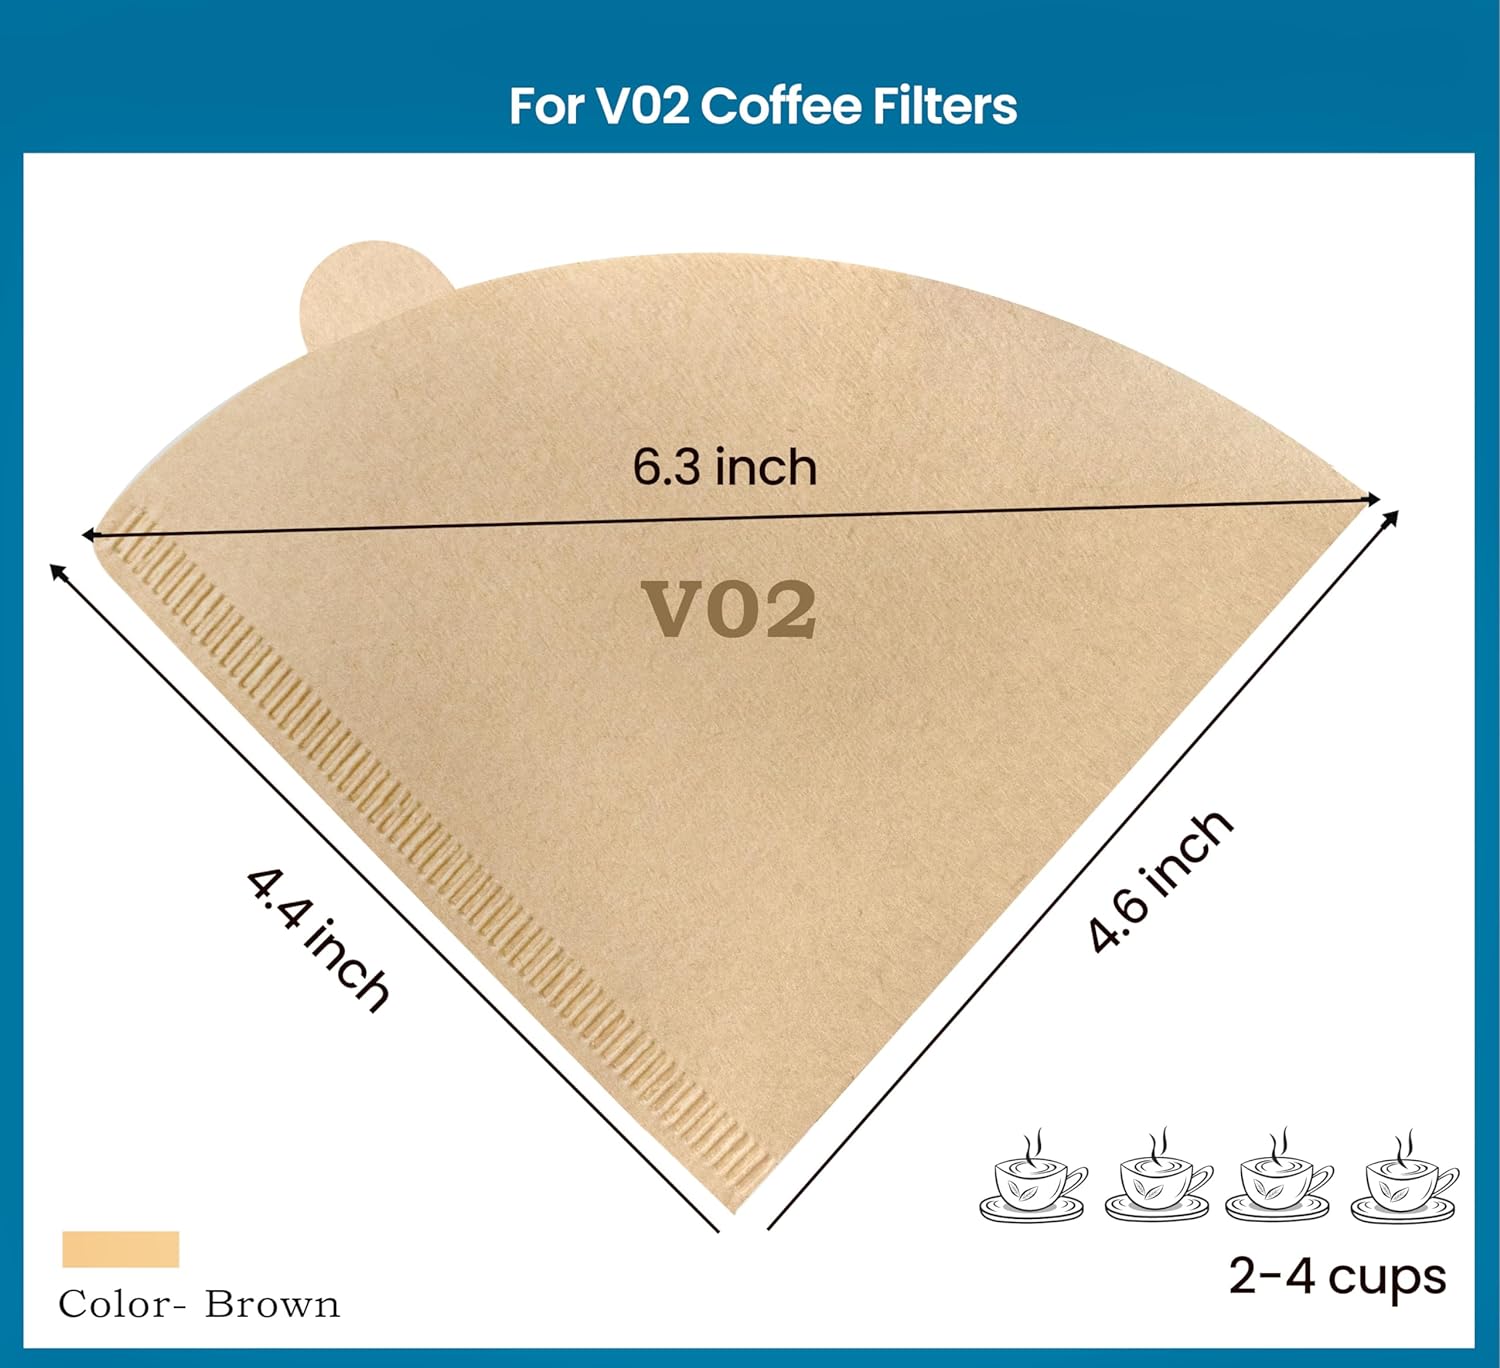 MIBRU Coffee Filters V60 Cone Paper White 100pcs Coffee Filters Unbleached Paper Filters Compatible with Pour Over Drippers 2-4 Cups Size 02 Coffee Filters v60 (1-4 Cups 02, 100)